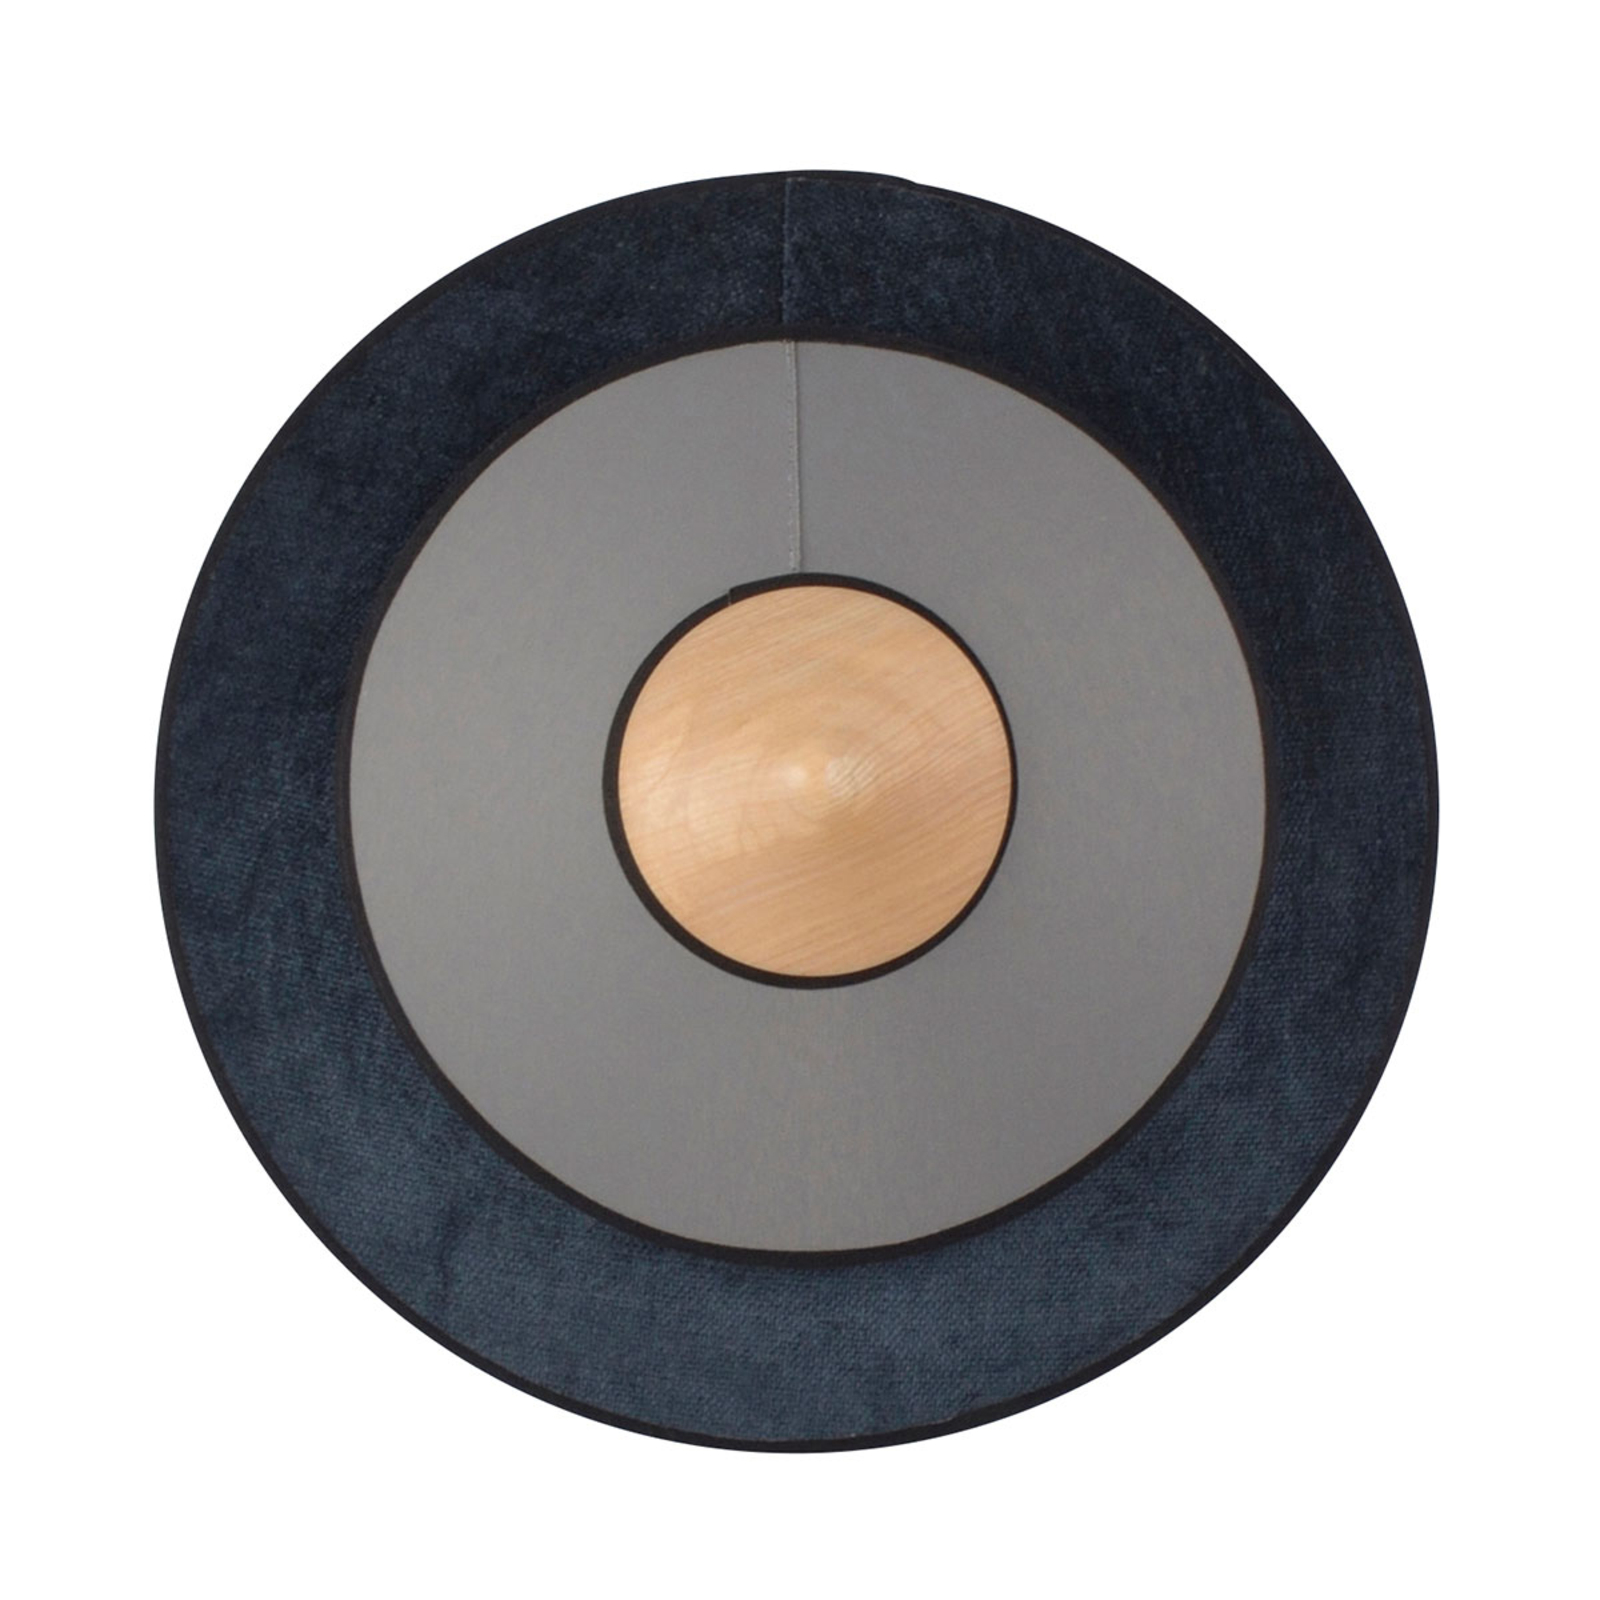 Forestier Cymbal S LED wall light, midnight